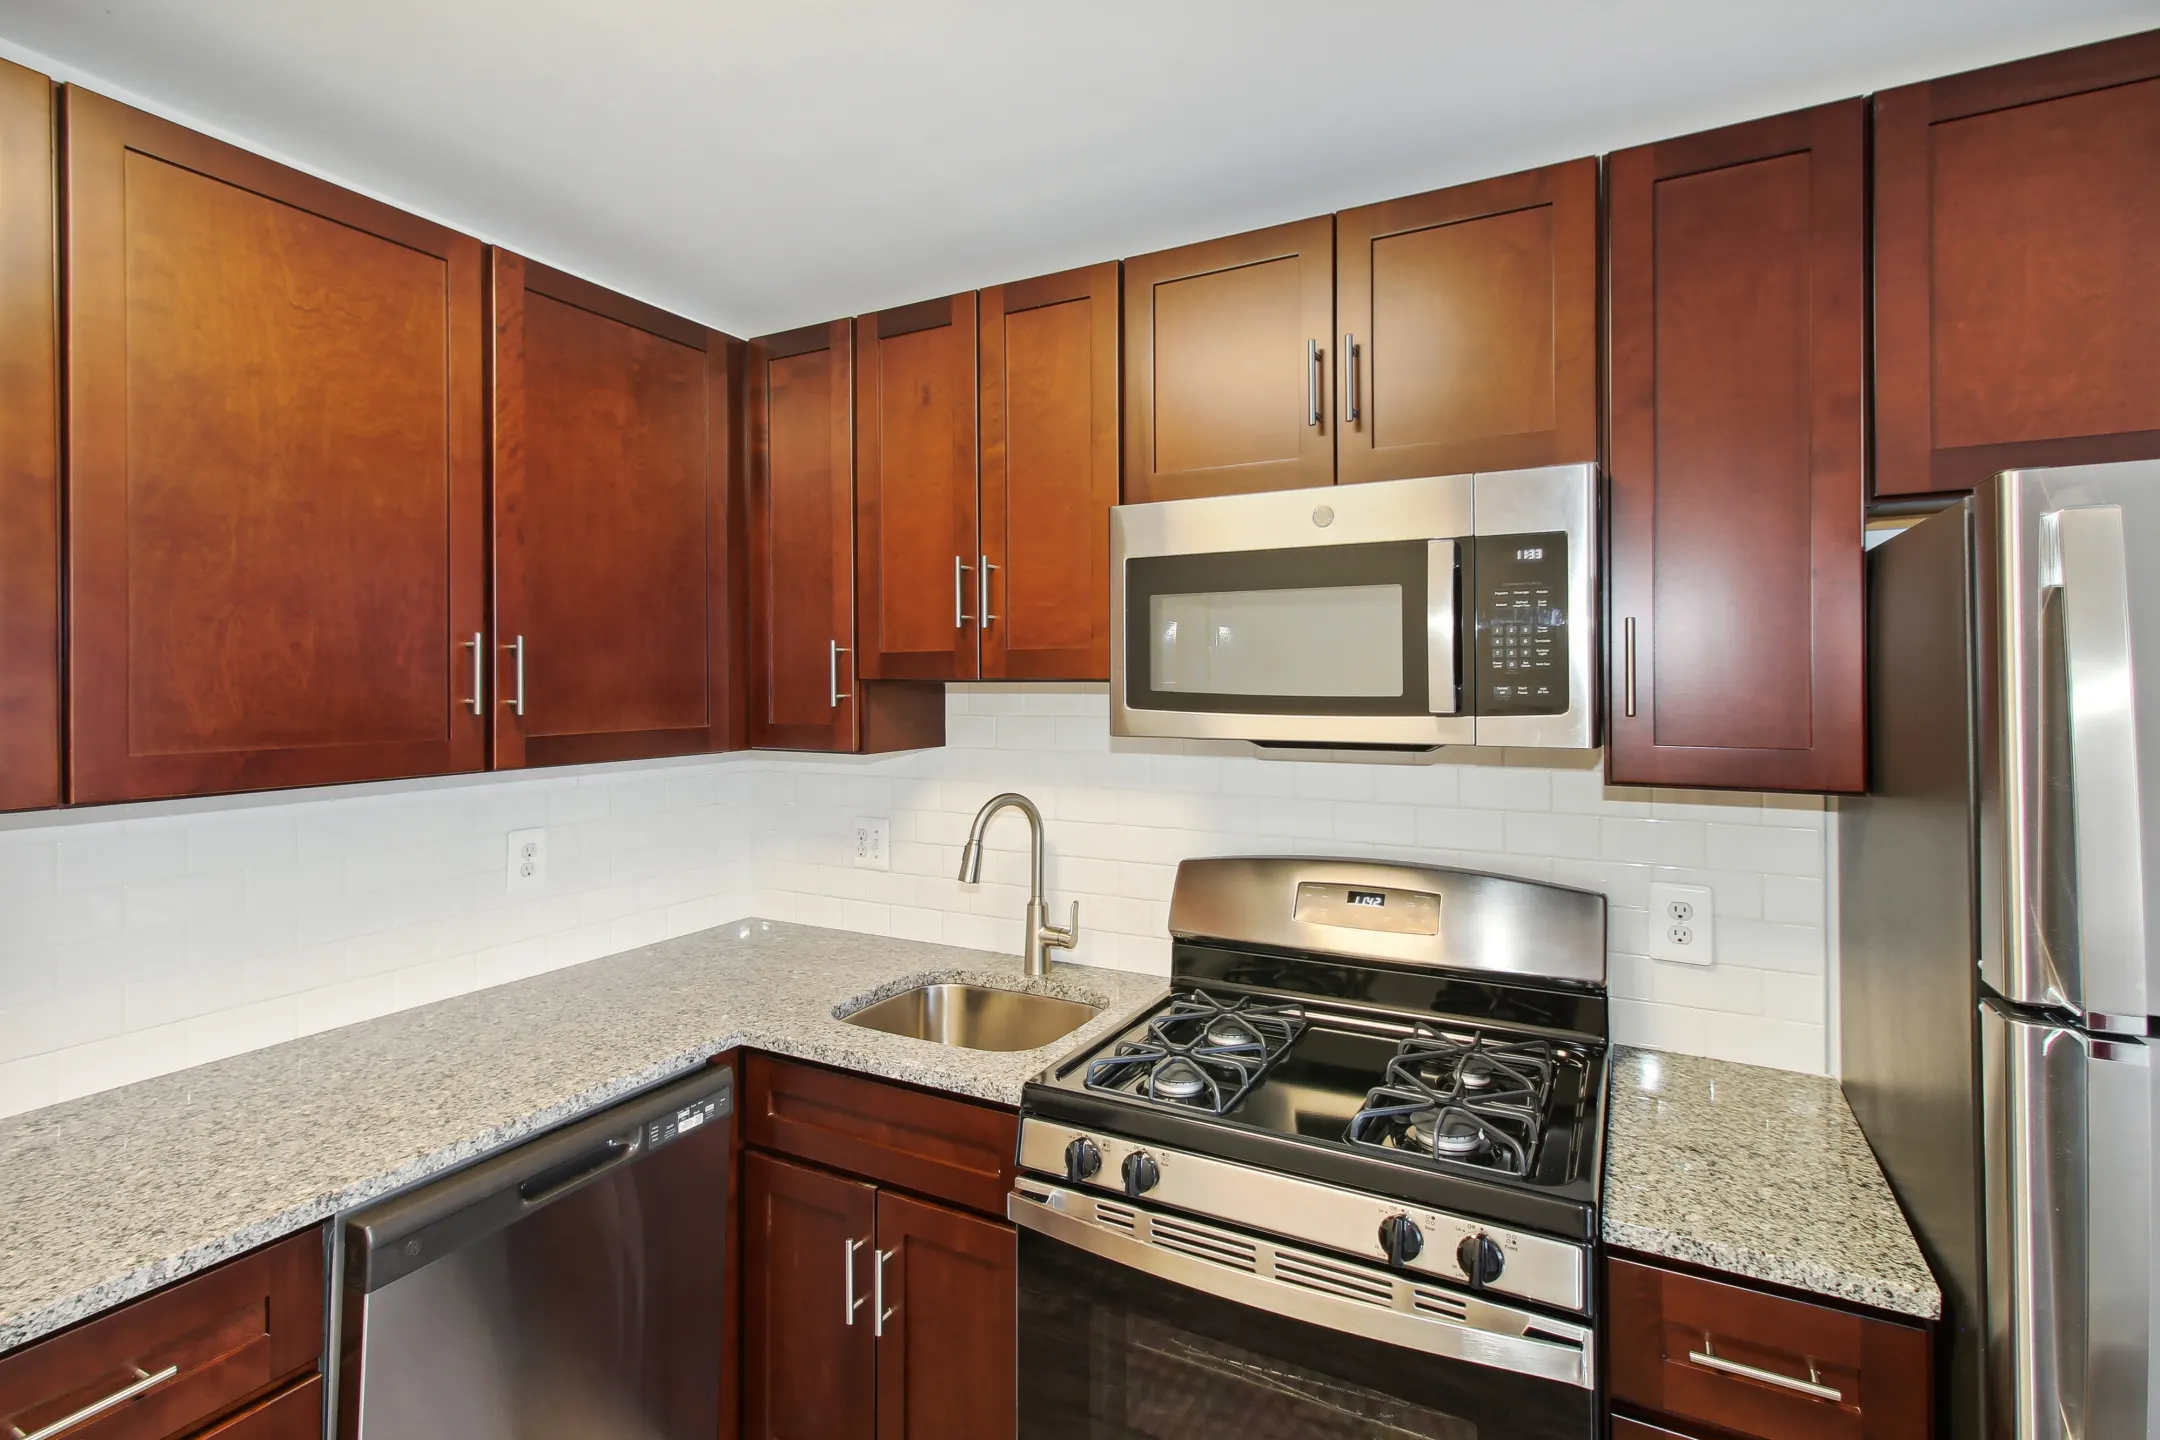 Kitchen - Tuscany Woods - Windsor Mill, MD